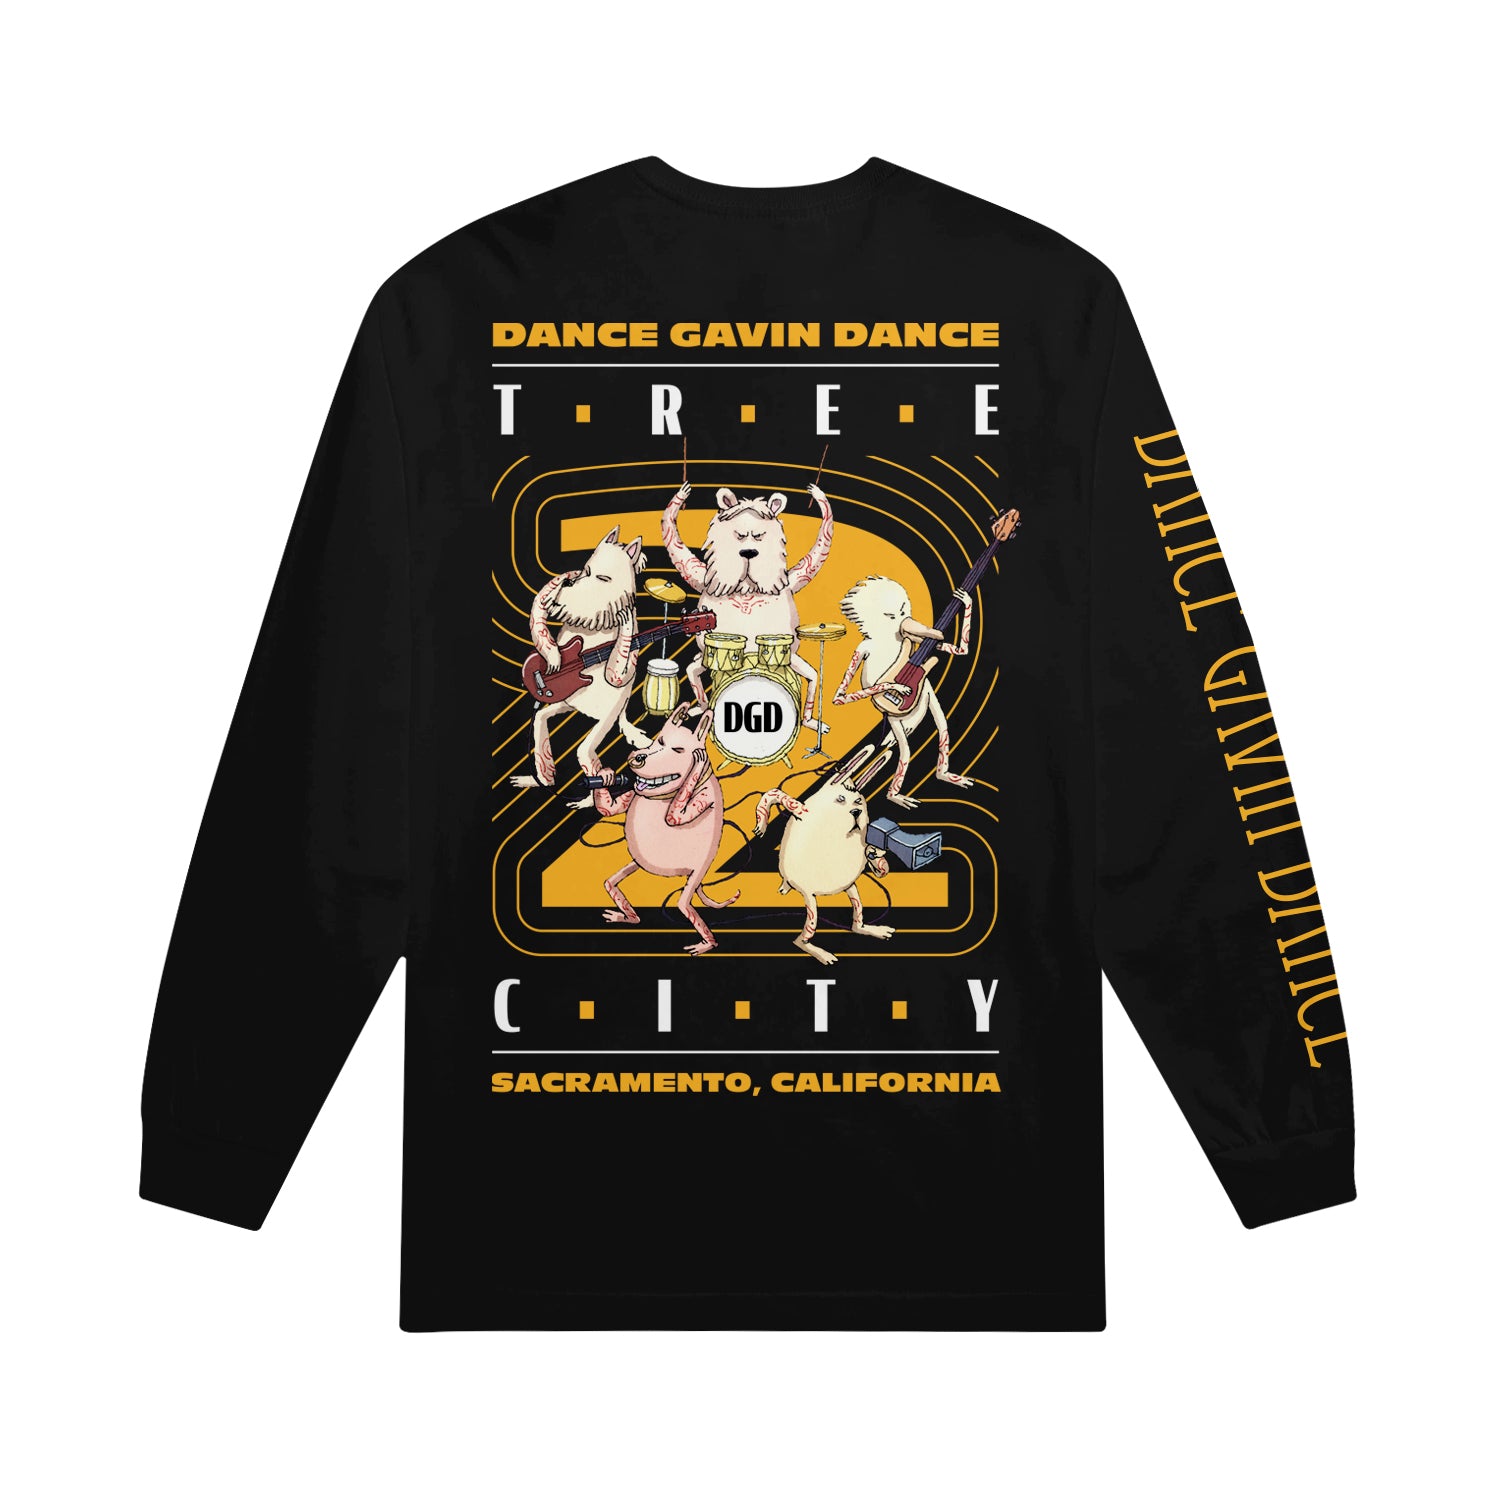 black long sleeve on white background shows back print that says dance gavin dance on top in yellow and tree in white below with cartoon characters playing guitars, drums and singing in multi colors in front of a big yellow number 2 with dance gavin dance in yellow on right sleeve